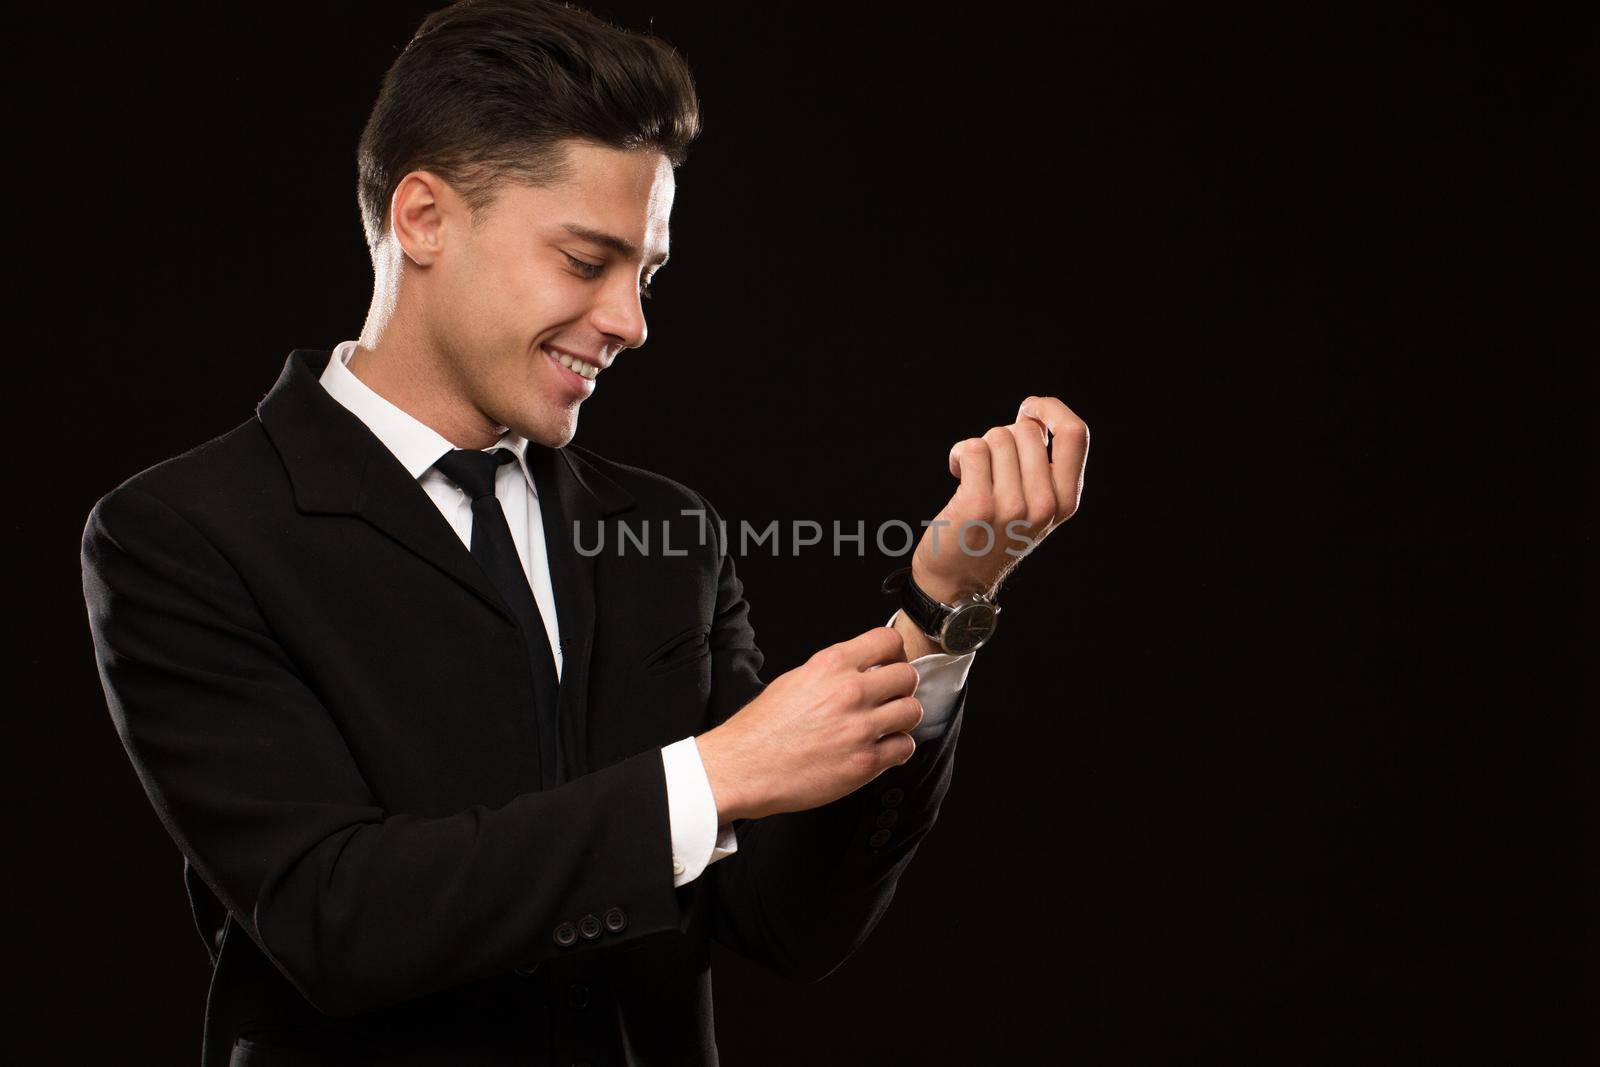 Cheerful handsome young man smiling joyfully adjusting sleeves of his shirt wearing elegant classic black suit and tie on black background copyspace sexy seductive masculinity success